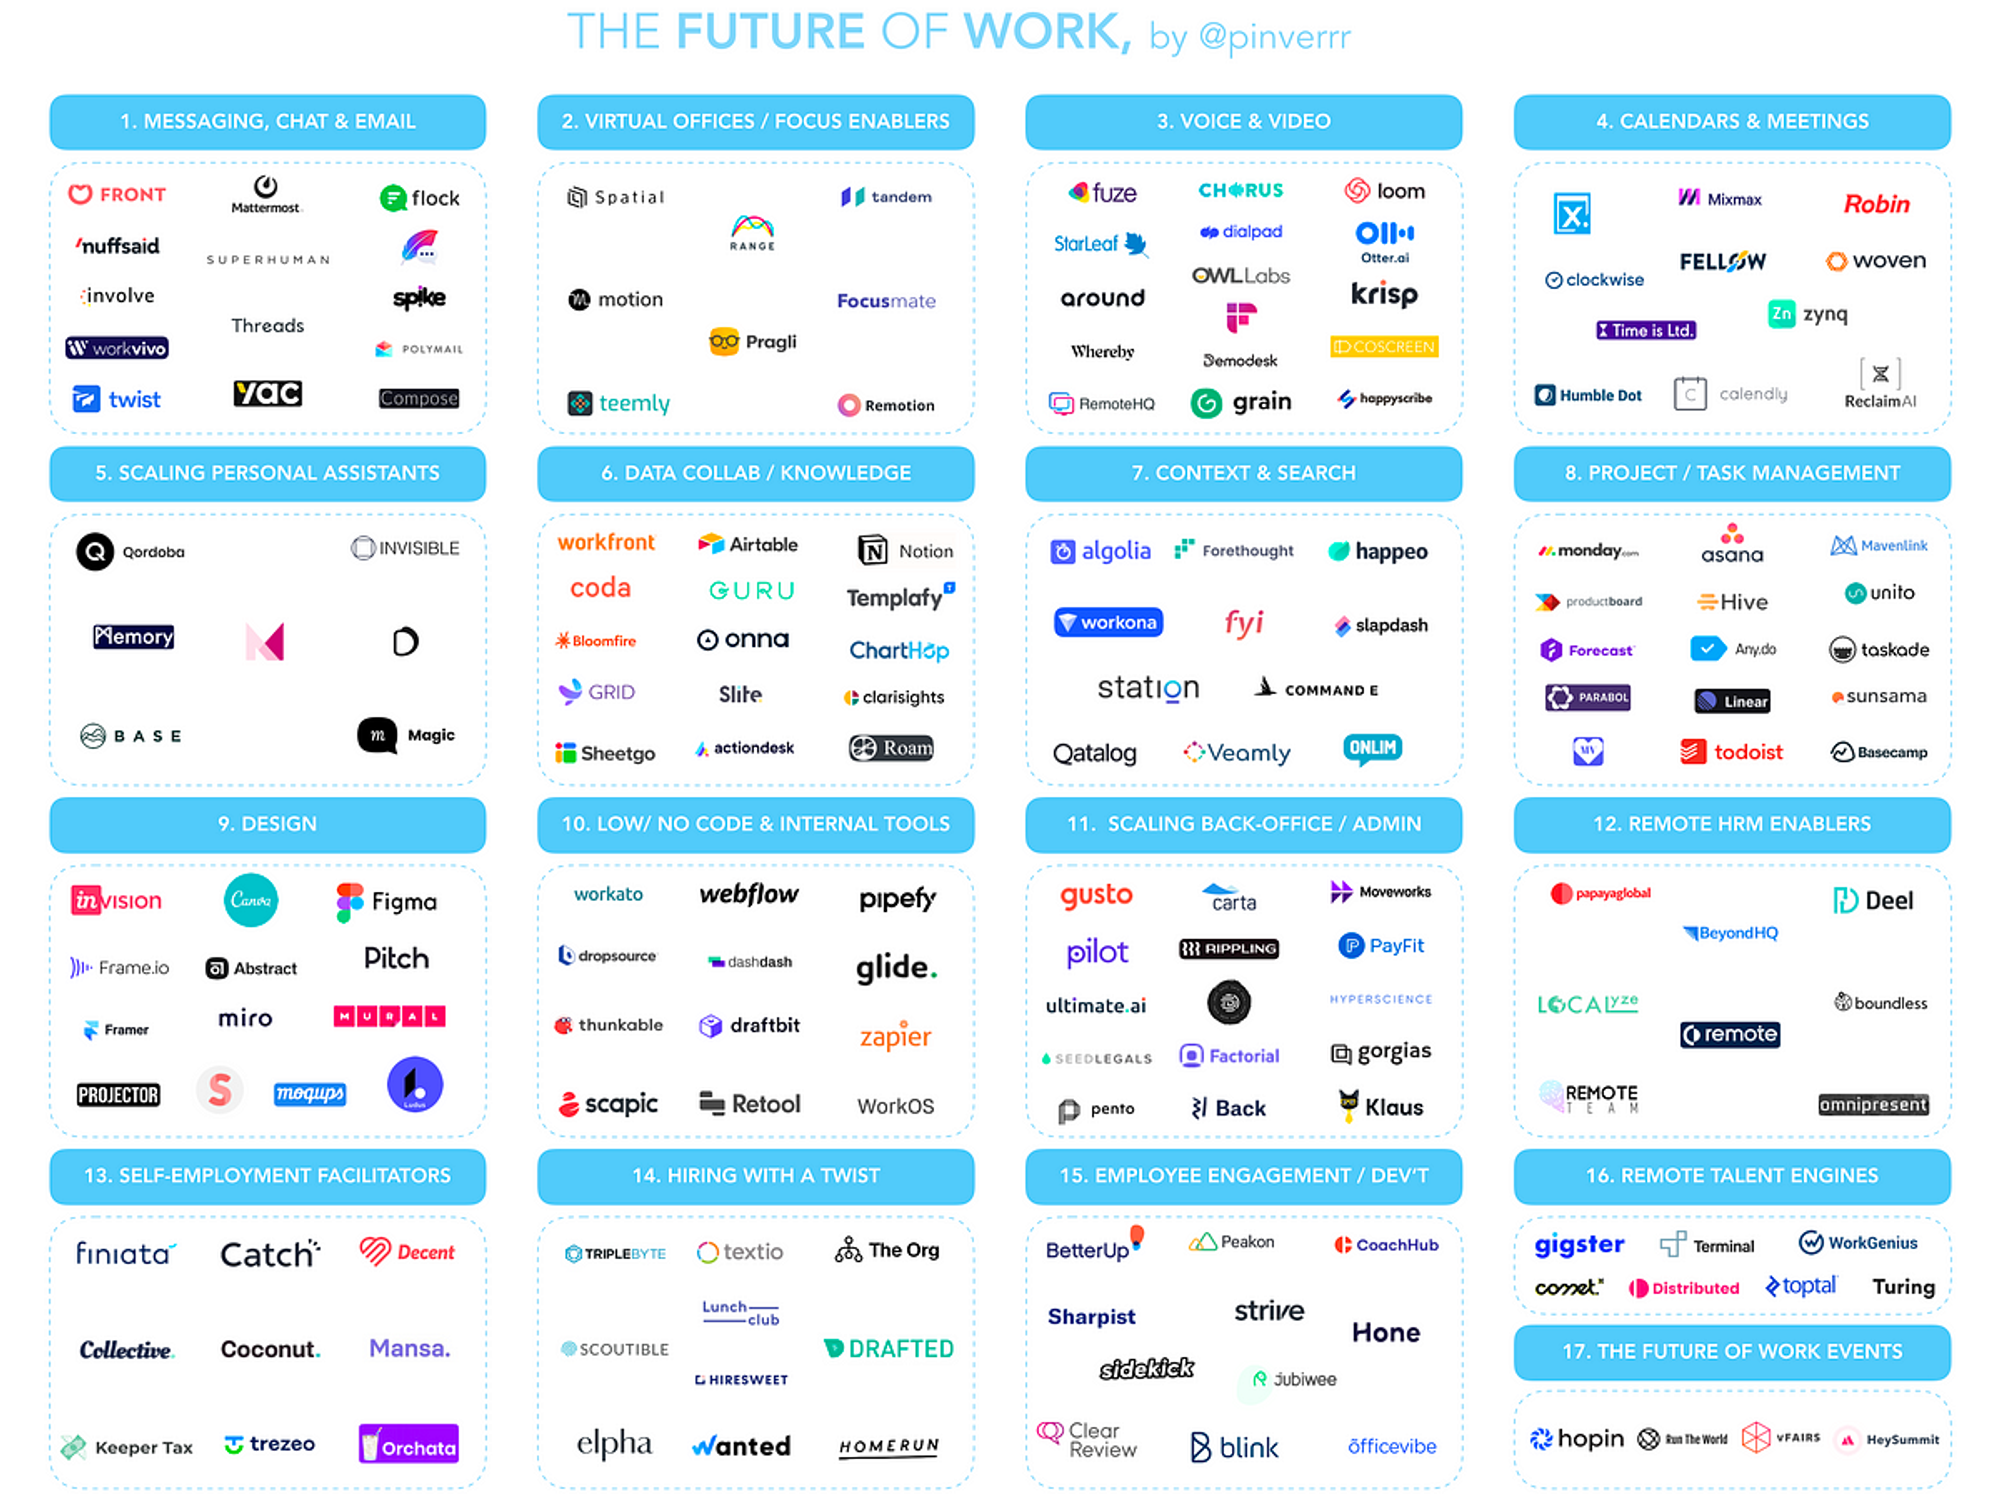 Mapping "The Future of Work" Startup & Investor ecosystem